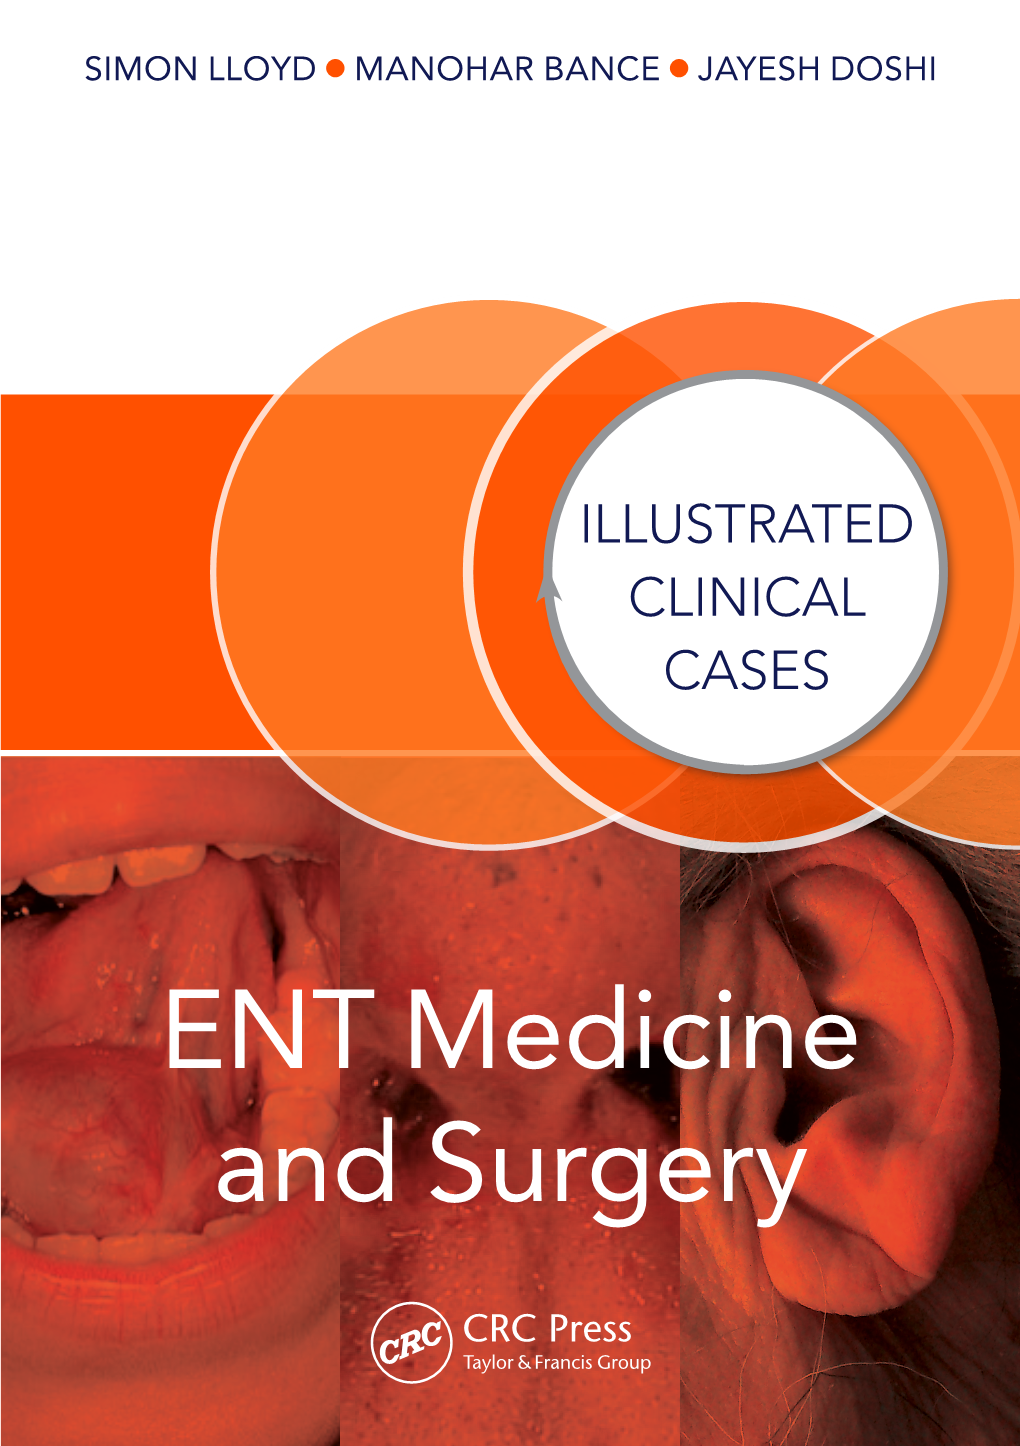 ENT Medicine and Surgery Illustrated Clinical Cases: ENT Medicine and Surgery